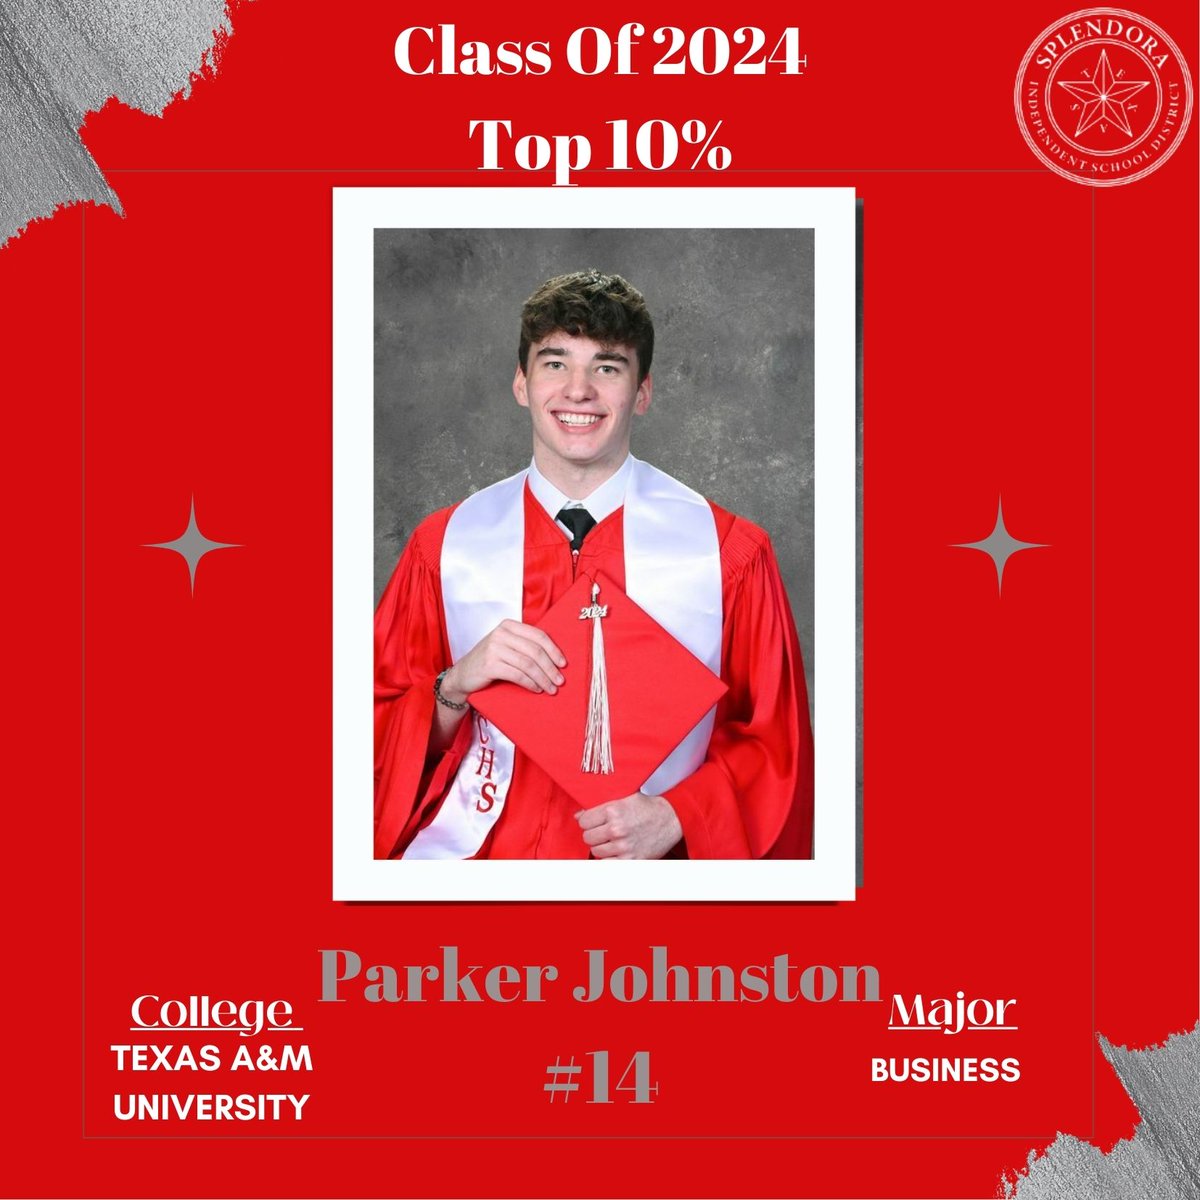 We would like to congratulate each student in the top 10 percent of the graduating 2024 class. We are very proud of their academic accomplishments. We will be counting down each day to celebrate each of our students' success. Congratulations, Parker Johnston - #14